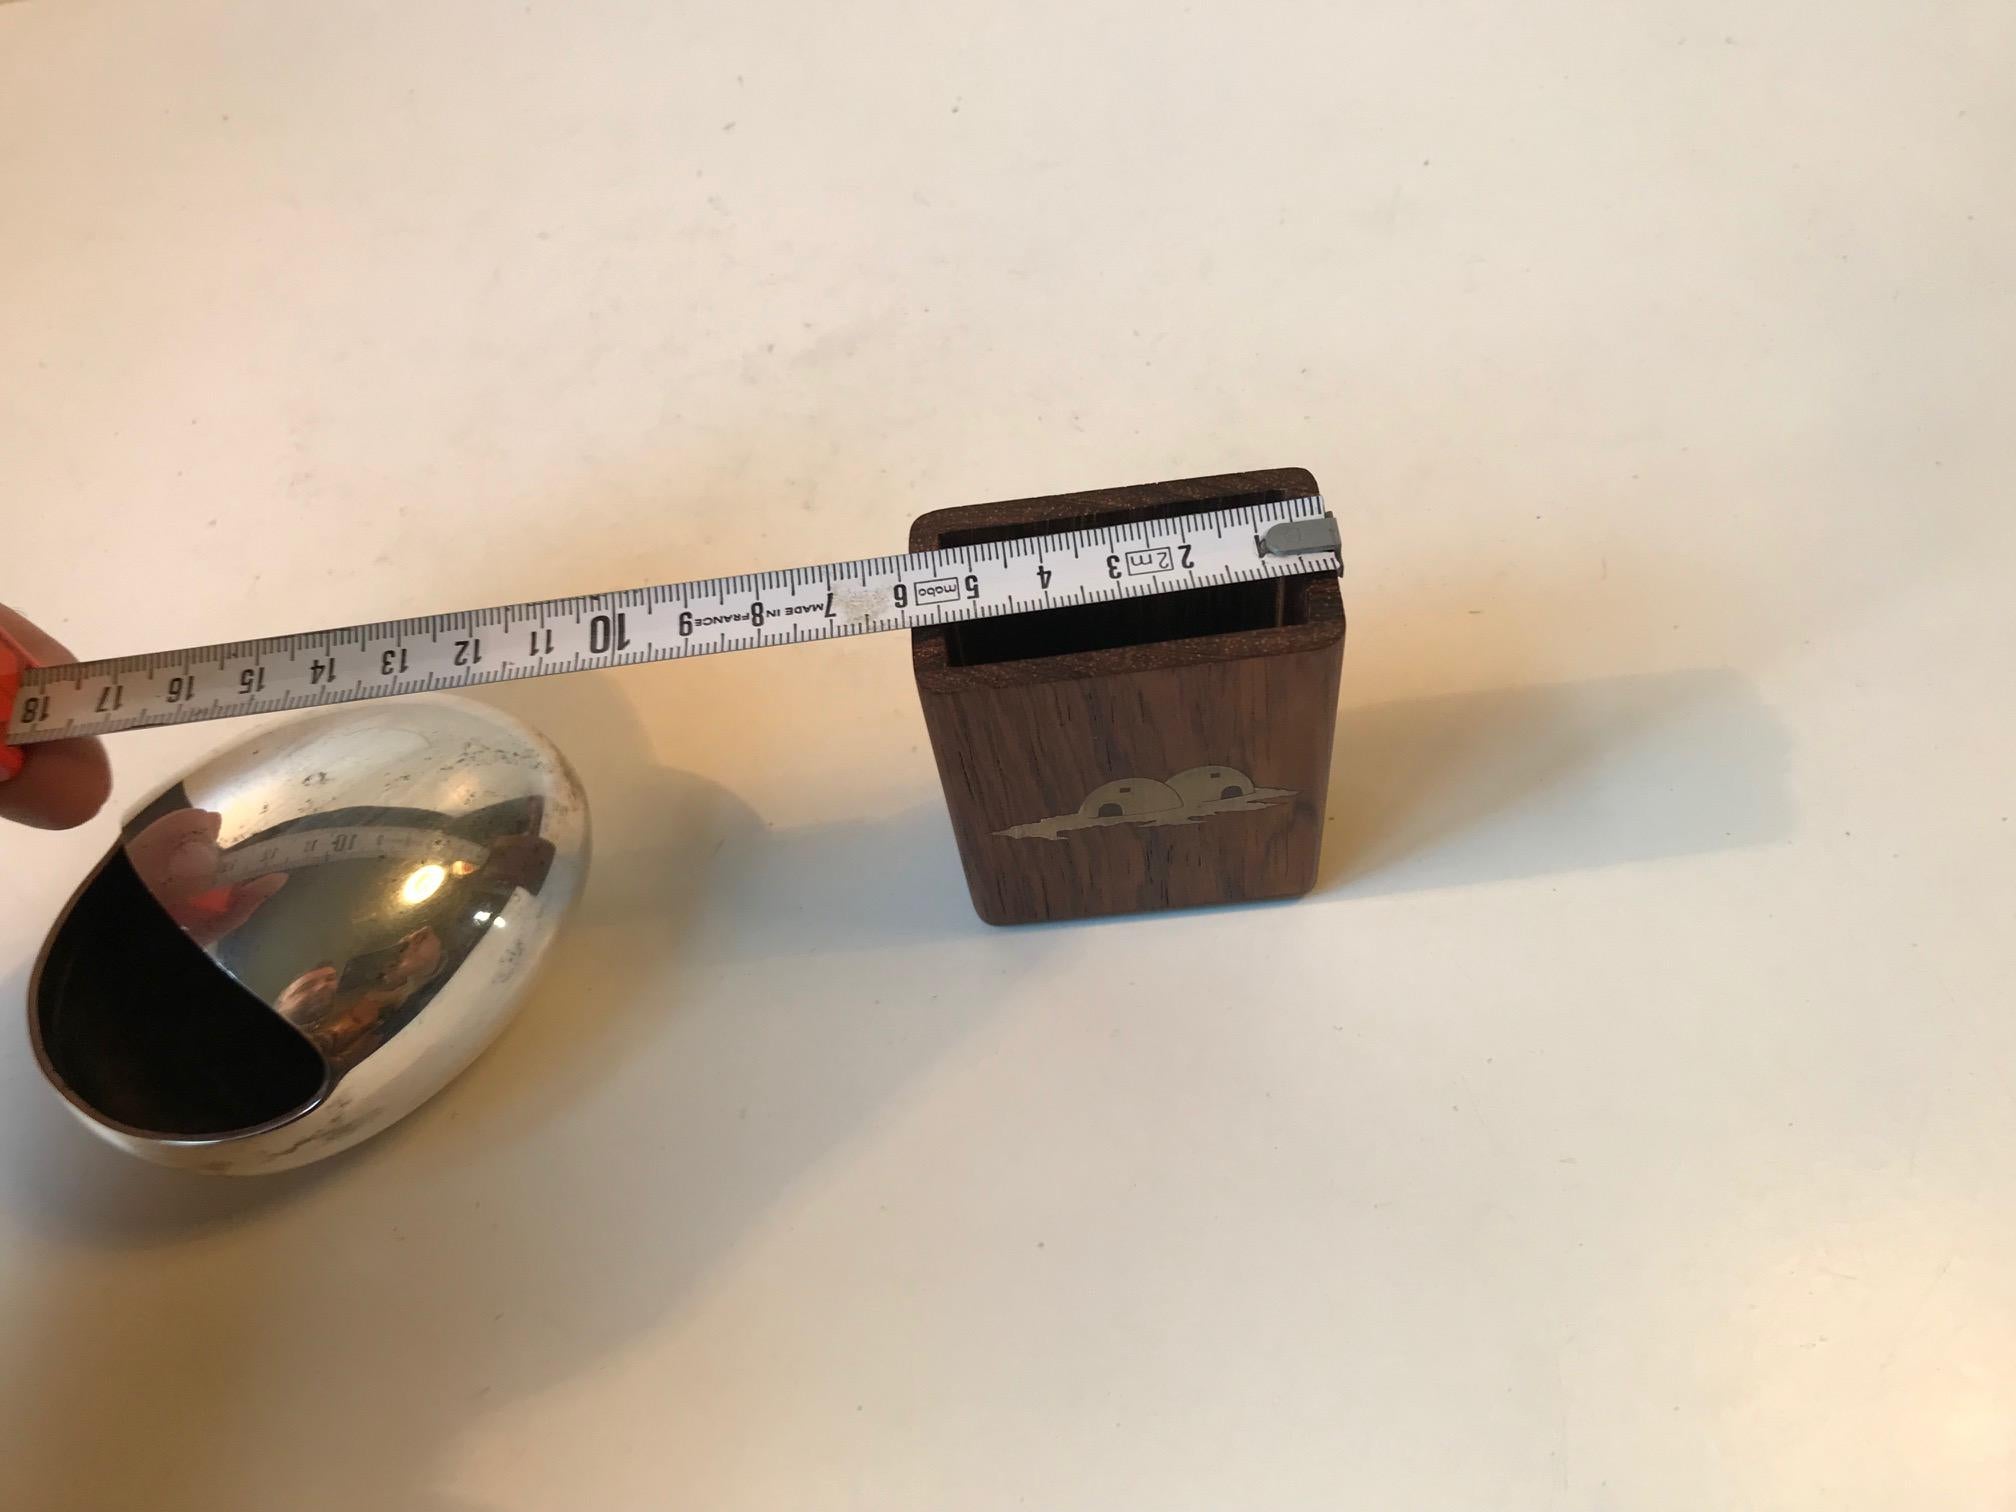 Wood Modernist Danish Ashtray and Cigarette Holder by Carl Cohr and Axel Salomonsen